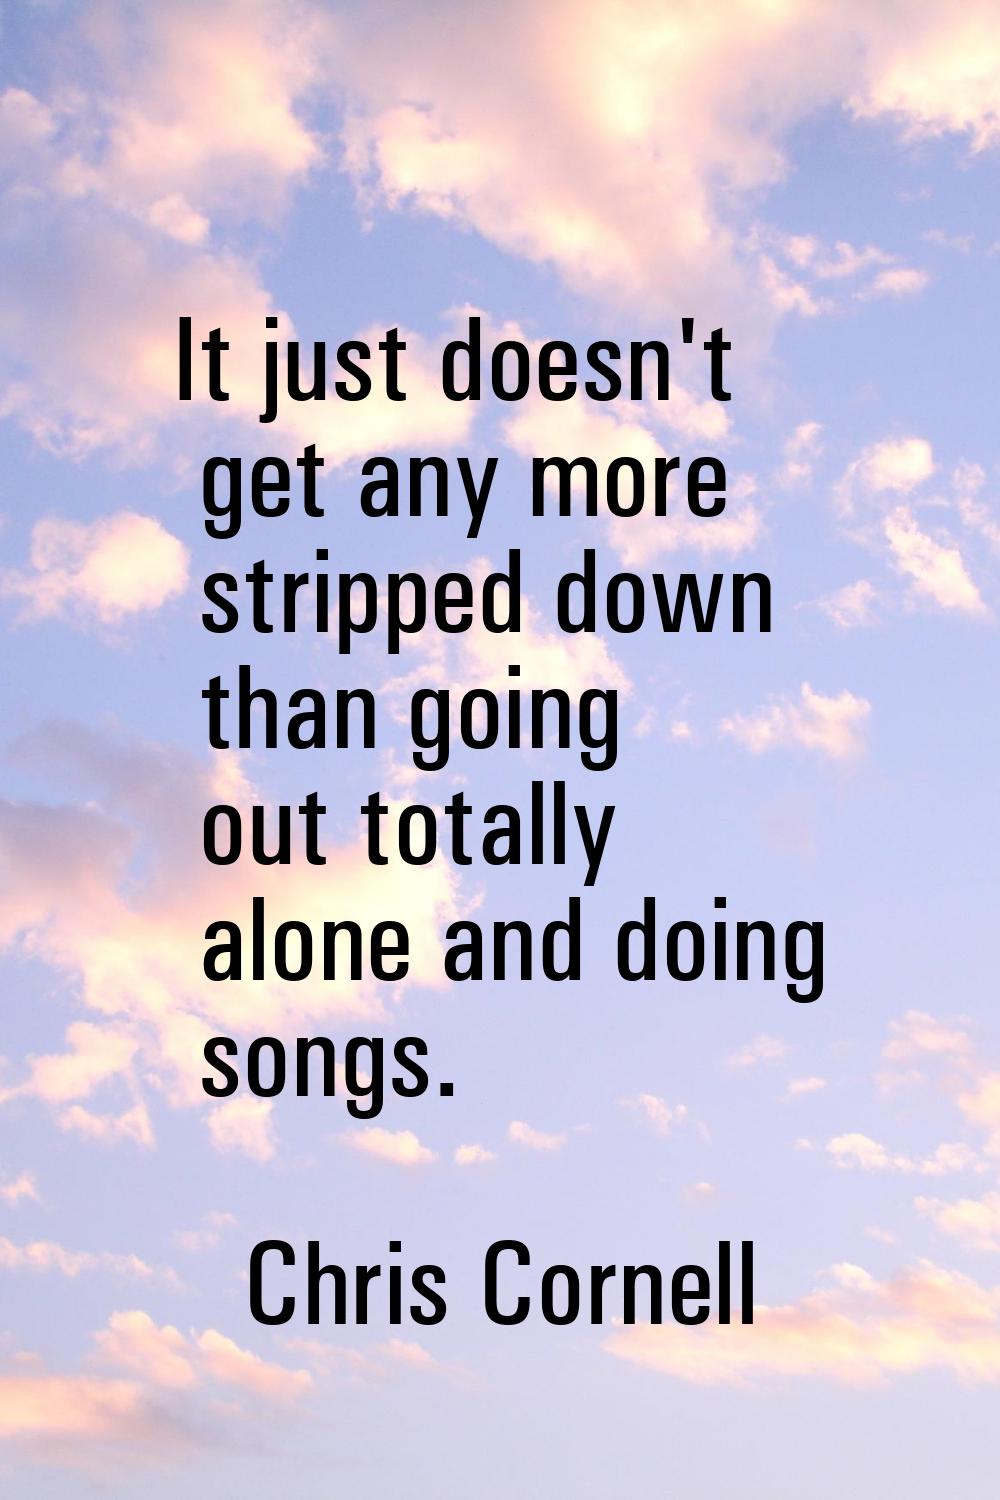 It just doesn't get any more stripped down than going out totally alone and doing songs.